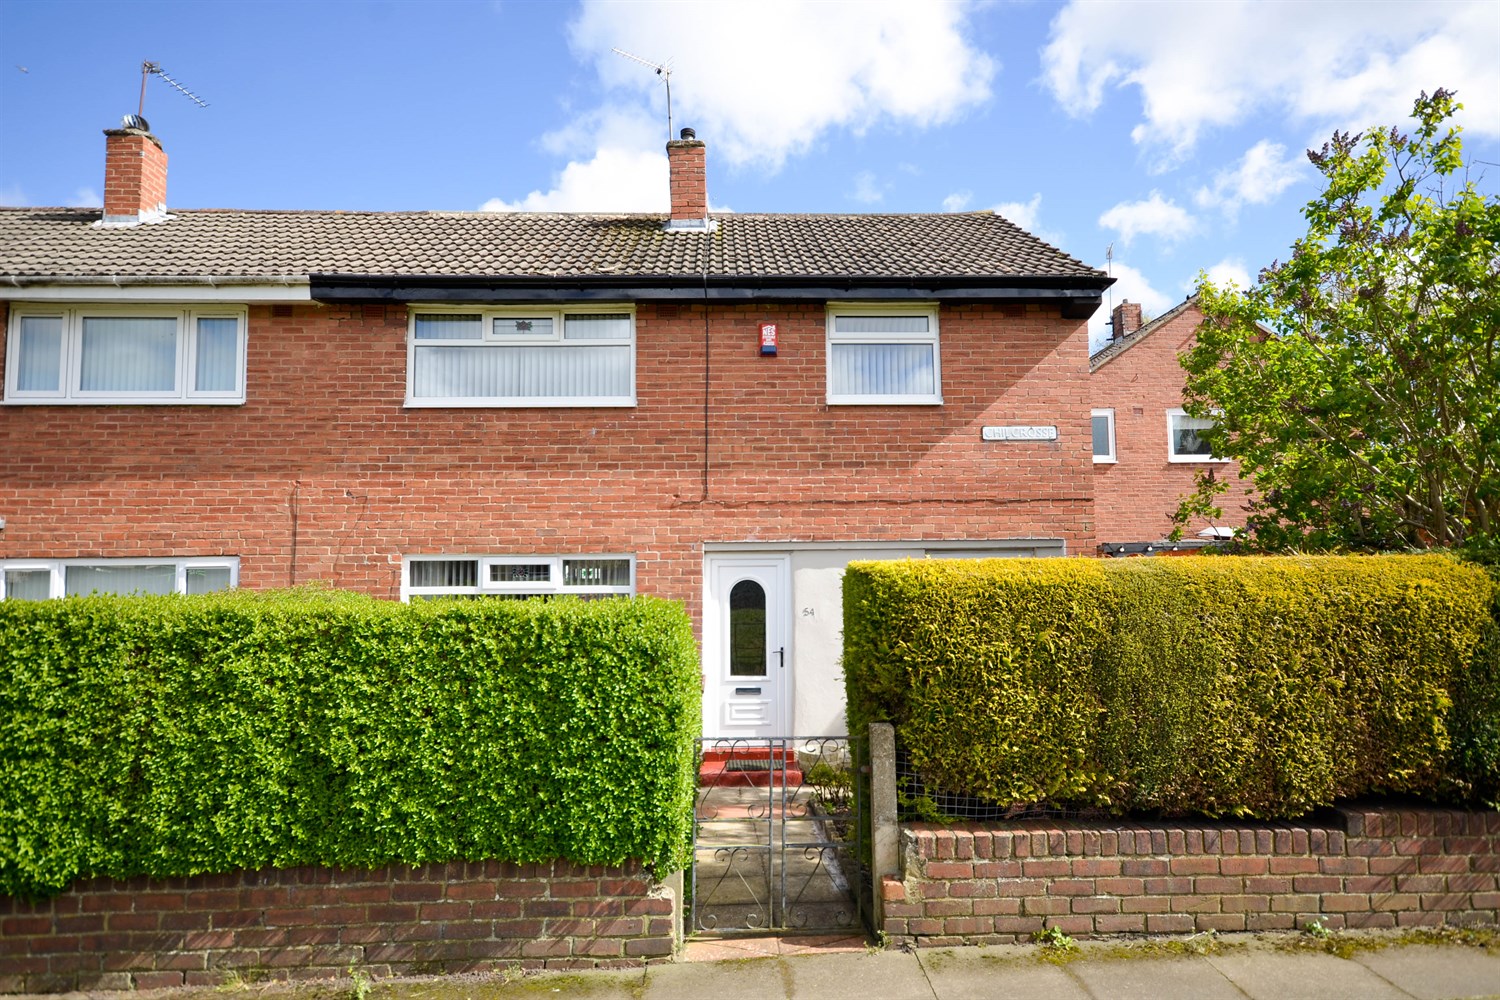 3 bed semi-detached house for sale in Chilcrosse, Leam Lane - Property Image 1